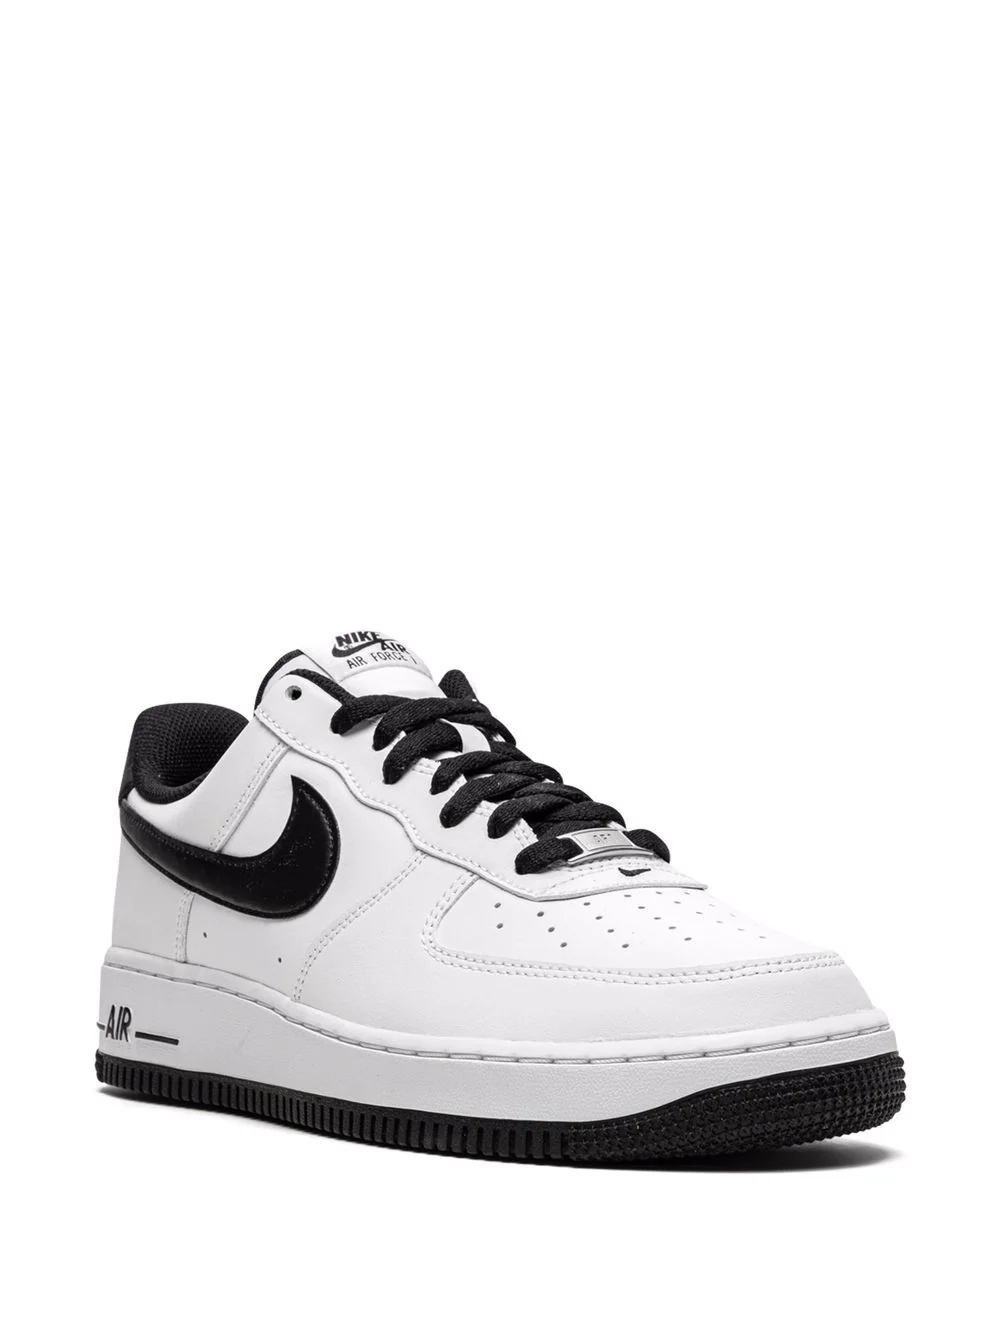 Air Force 1 '07 "White/Black" sneakers - 2